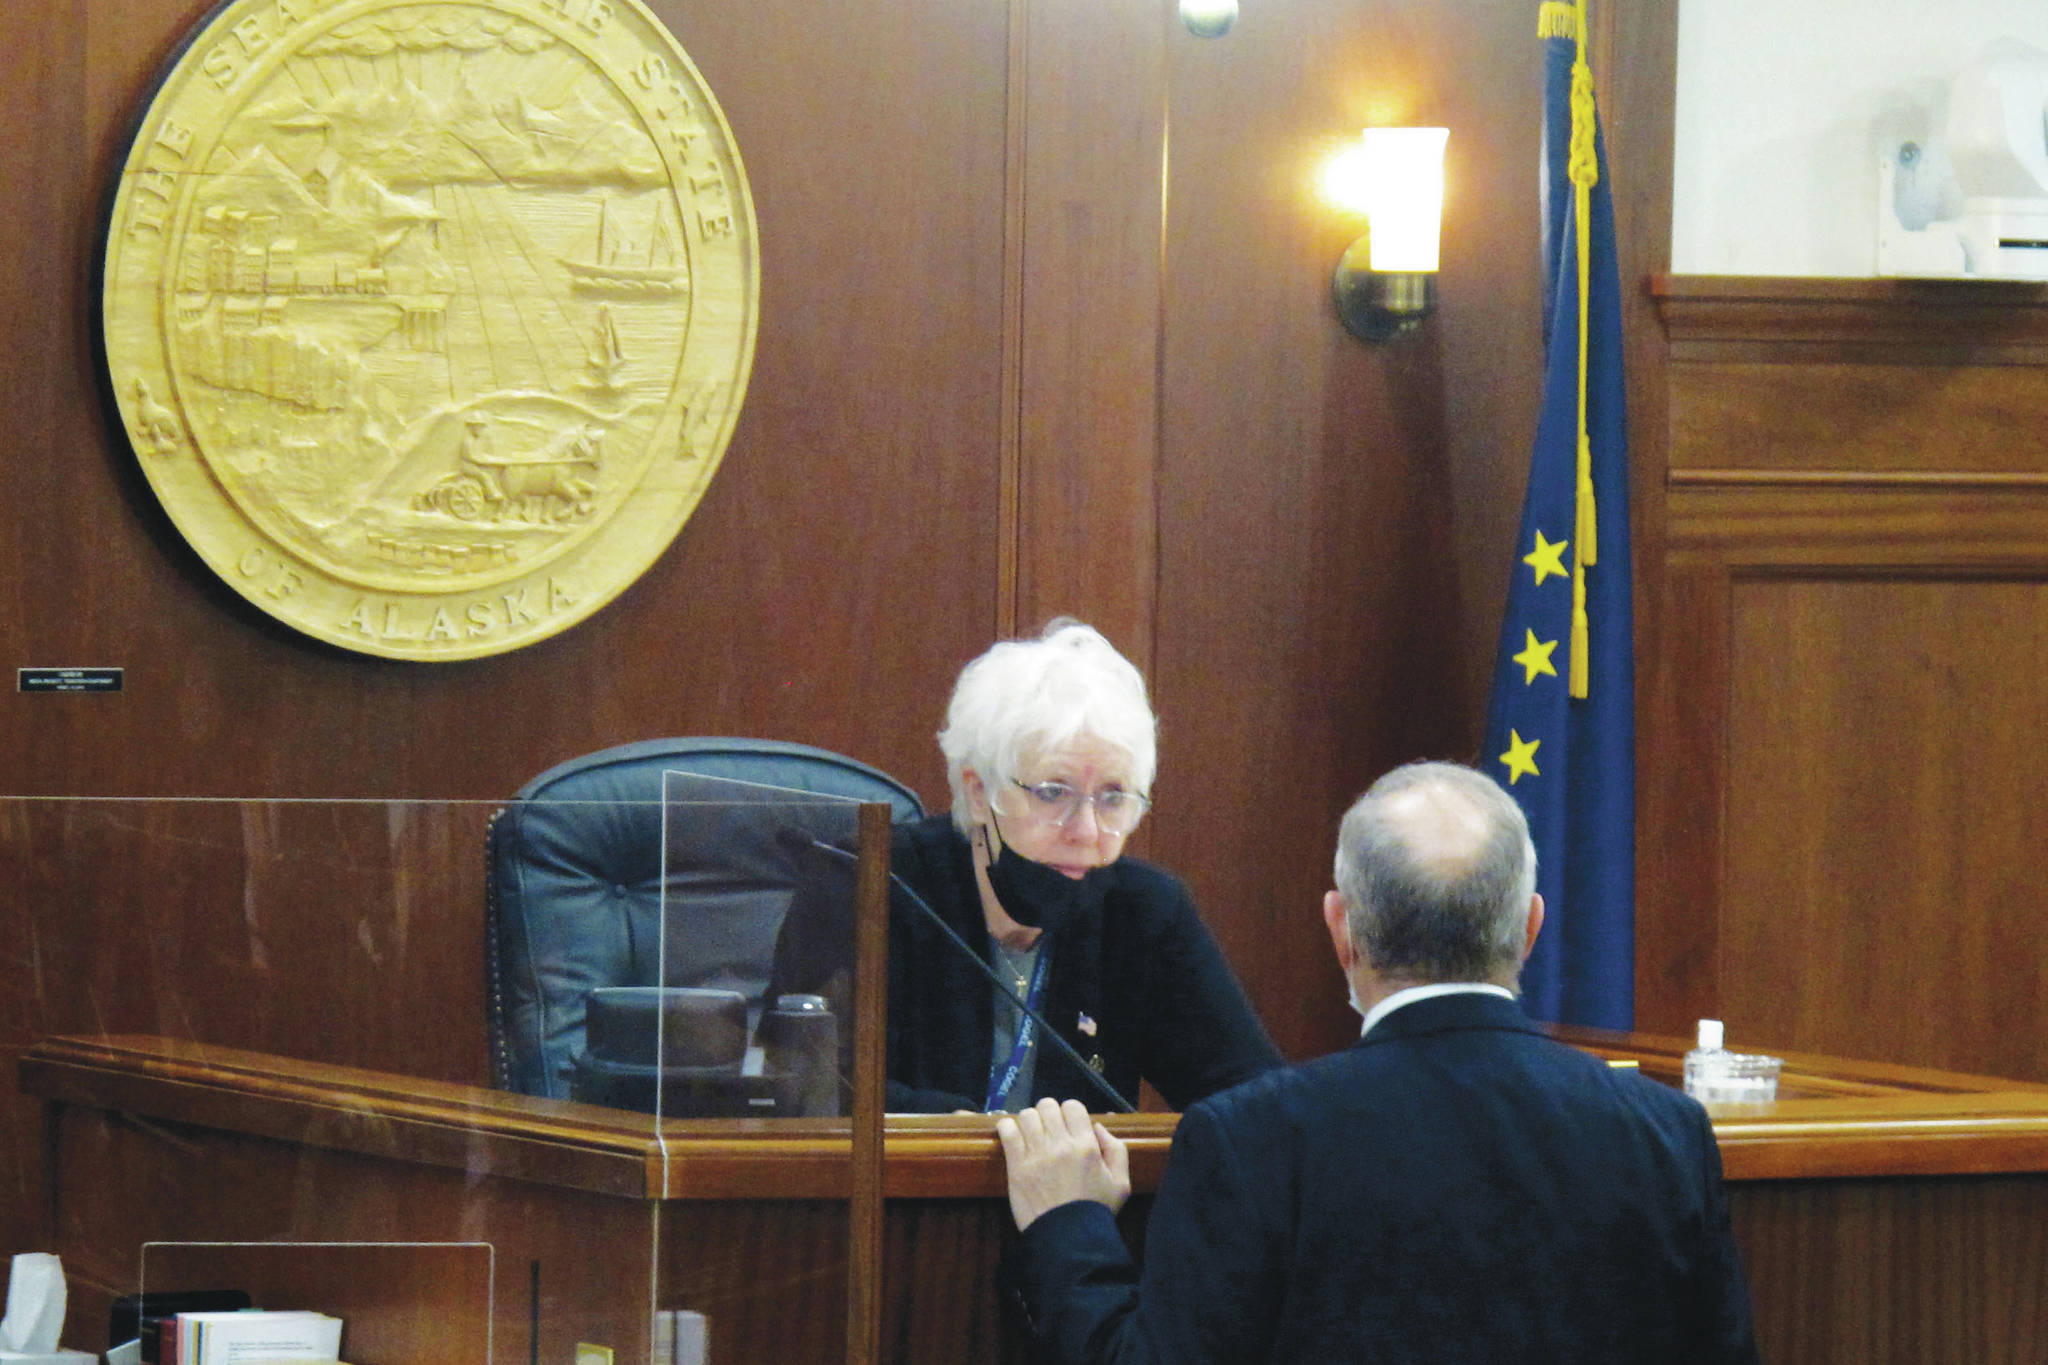 Alaska House Speaker Louise Stutes, left, speaks to Rep. Bryce Edgmon on the House floor on Thursday, Feb. 18, 2021, in Juneau, Alaska. The House, which has struggled to organize, on Thursday adopted a report setting out committee assignments, a month into the legislative session. (AP Photo/Becky Bohrer)